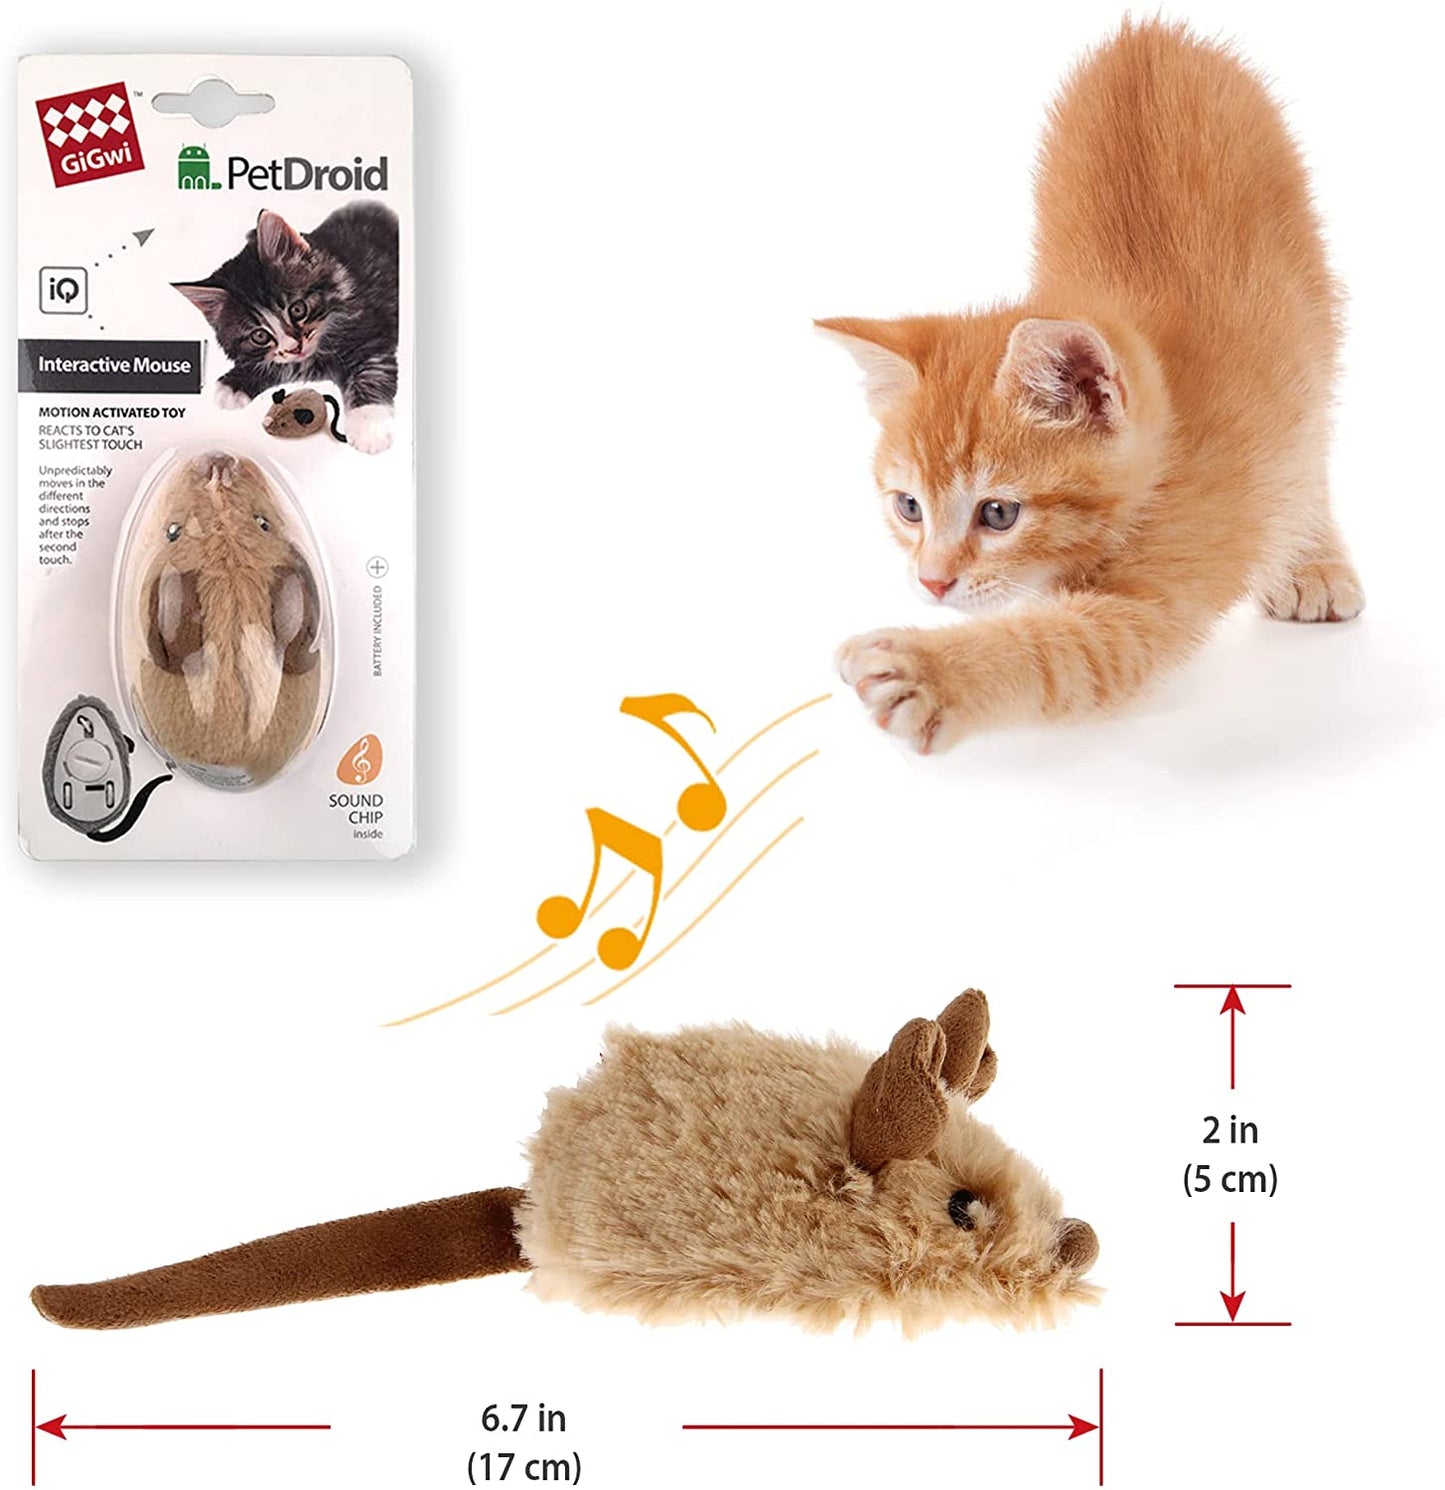 GiGwi Moving Cat Toy Mouse